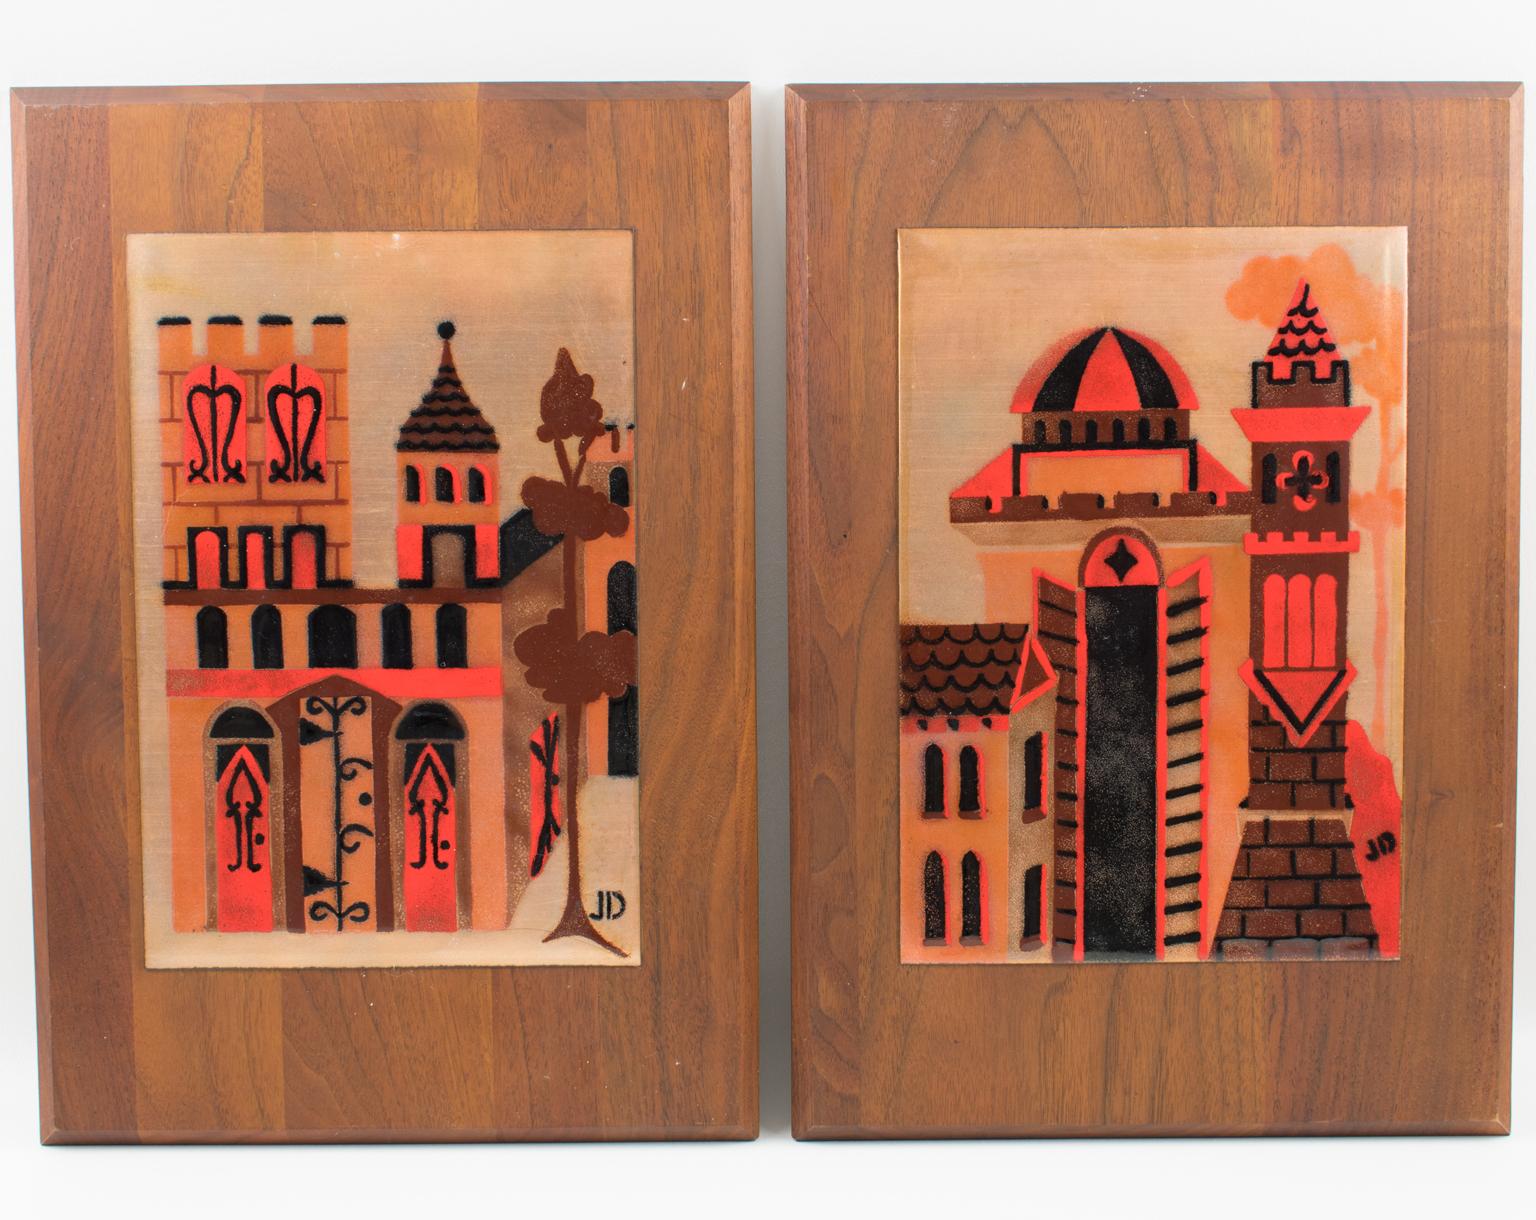 Judith Daner designed this pair of superb Mid-Century modernist enamel on copper artworks. Each panel is one tile plaque mounted on the original walnut wood frame. The abstract and stylized design features cityscape and various types of buildings.